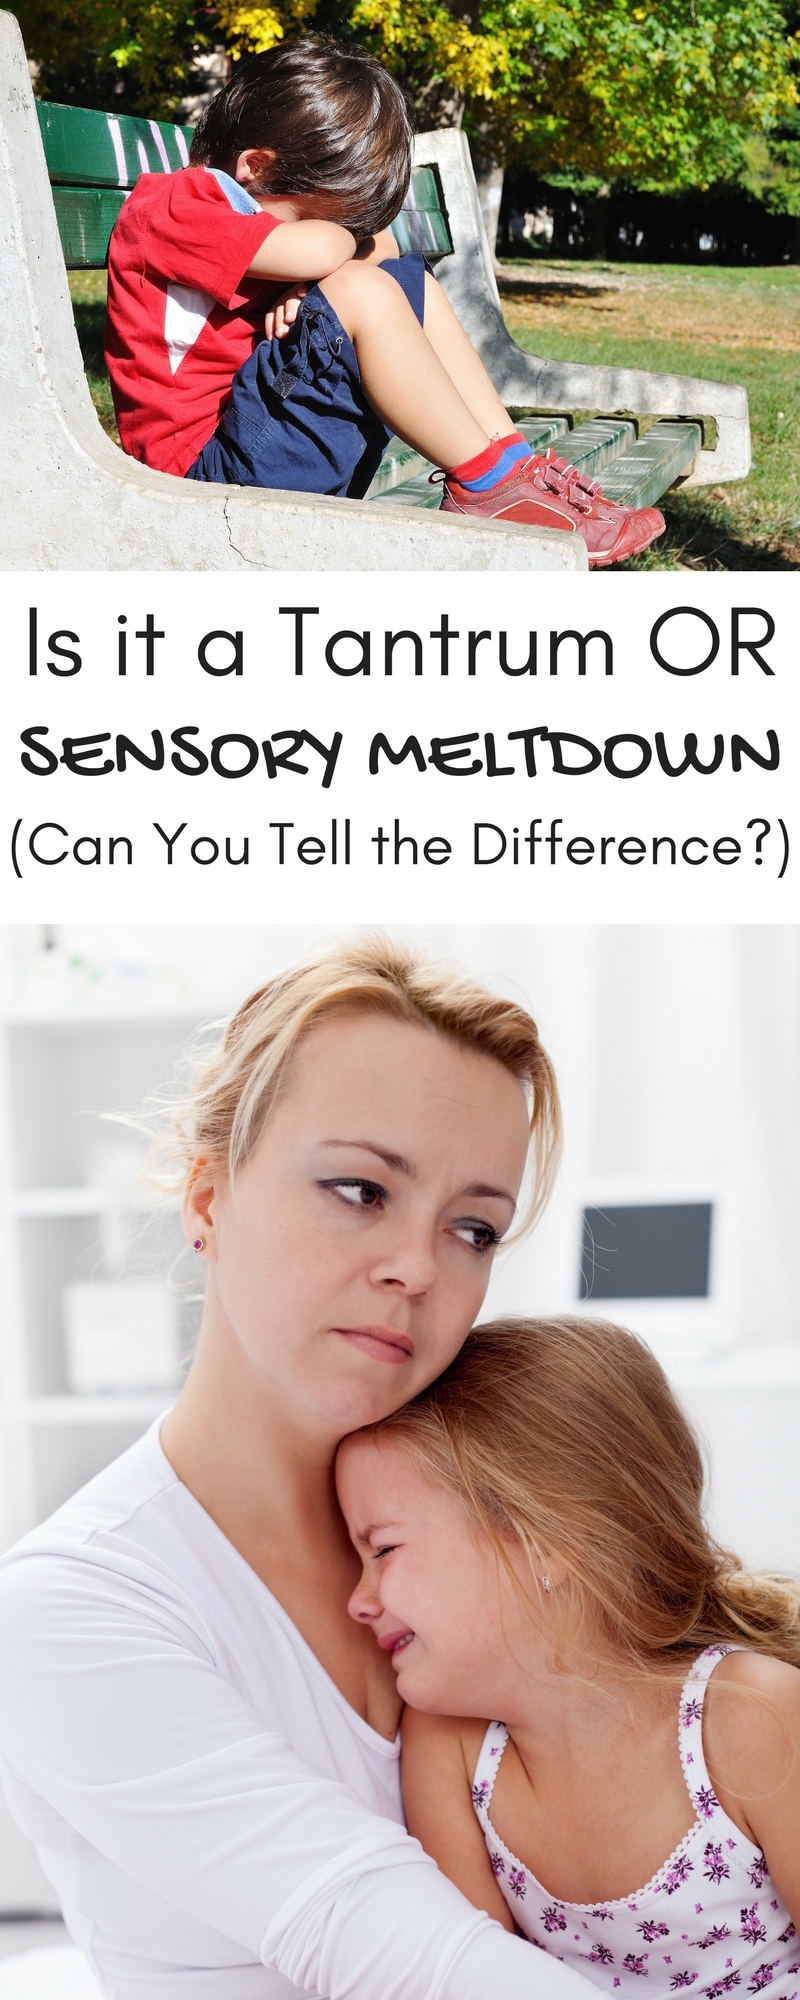 4 Simple Ways to tell a Tantrum from a Sensory Meltdown